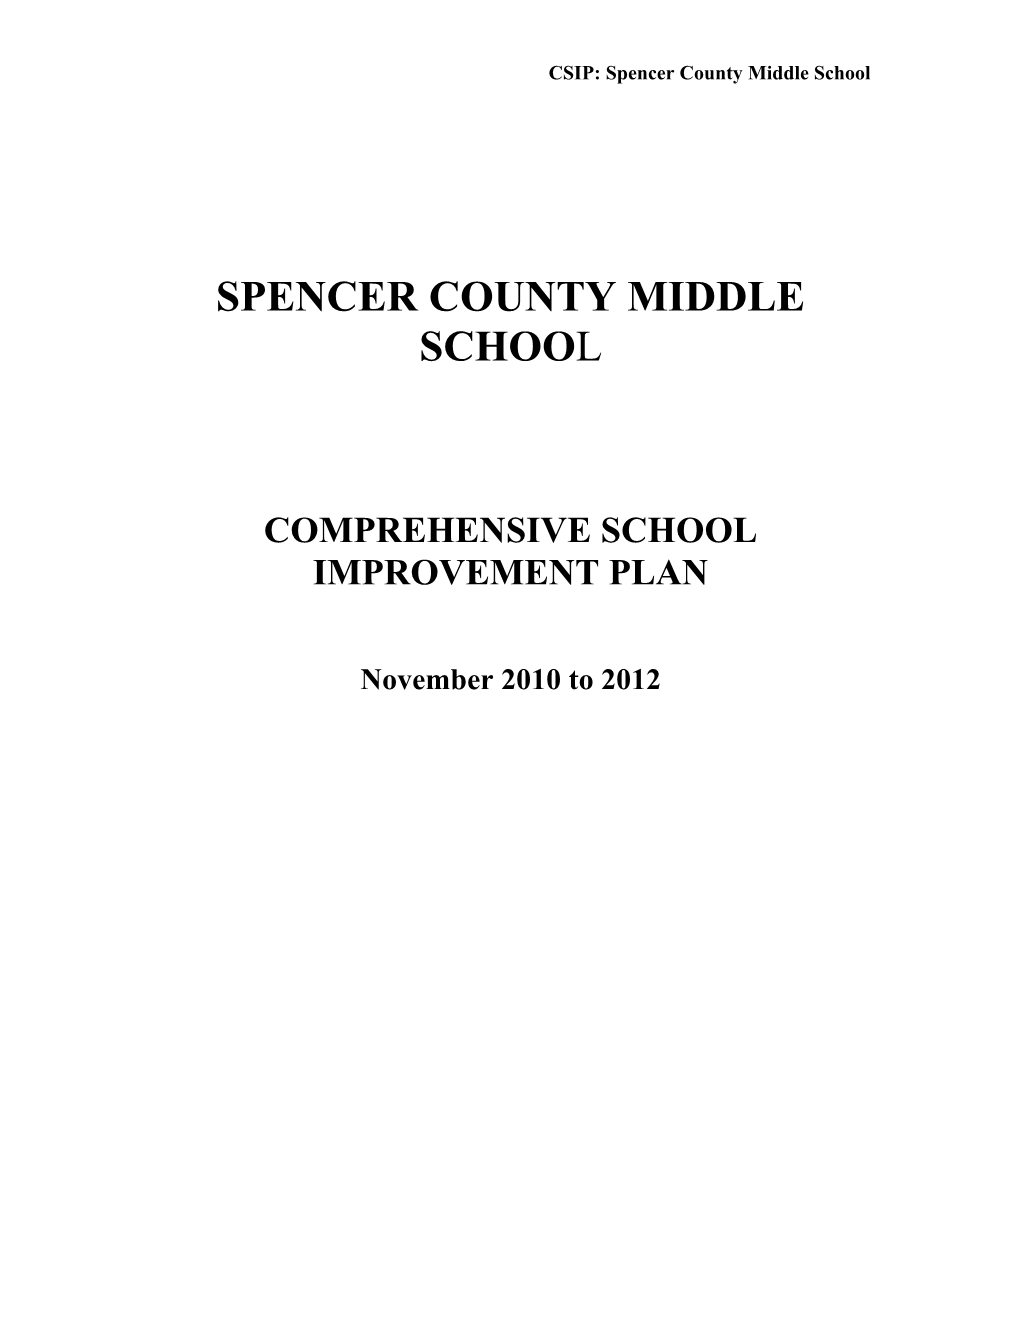 Spencer County Middle School